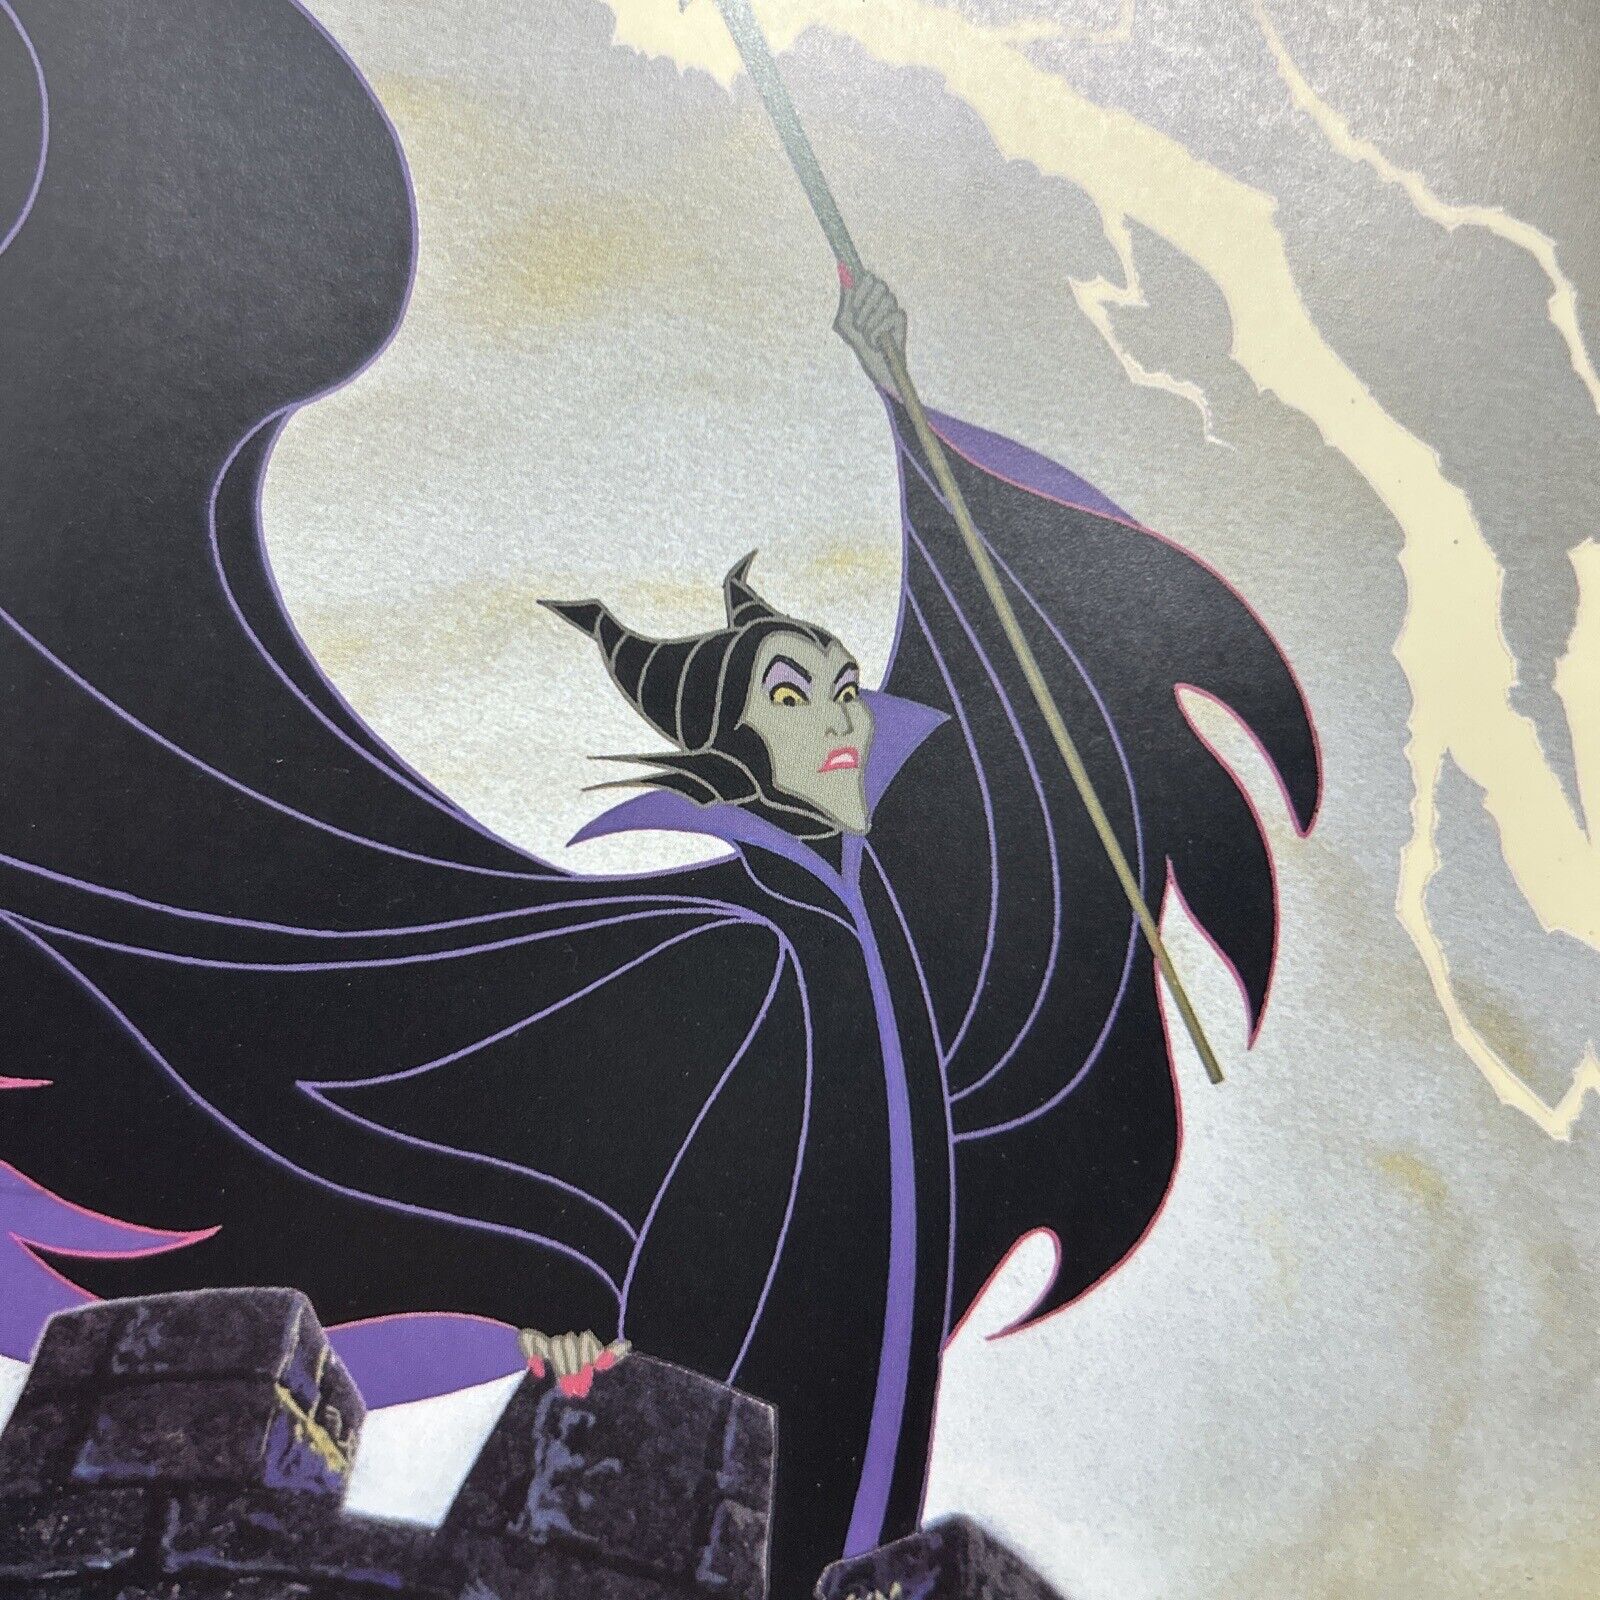 Disney Maleficent Print By The McGaw Group “Maleficent's Fury” 14.5” X 11.5